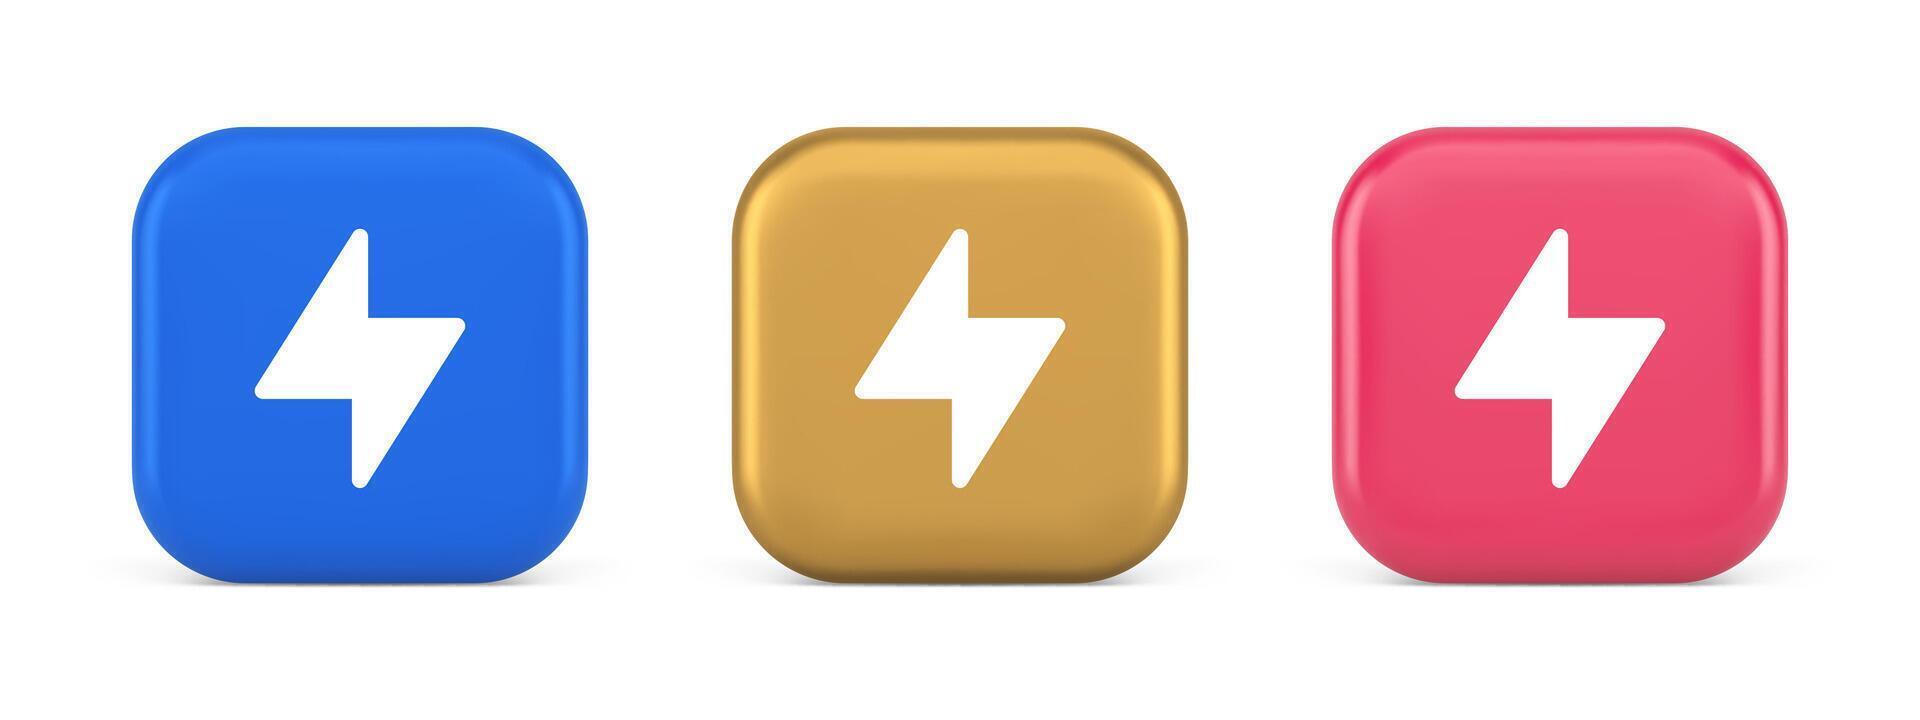 Charge power lightning button electricity thunderbolt arrow 3d realistic icon vector